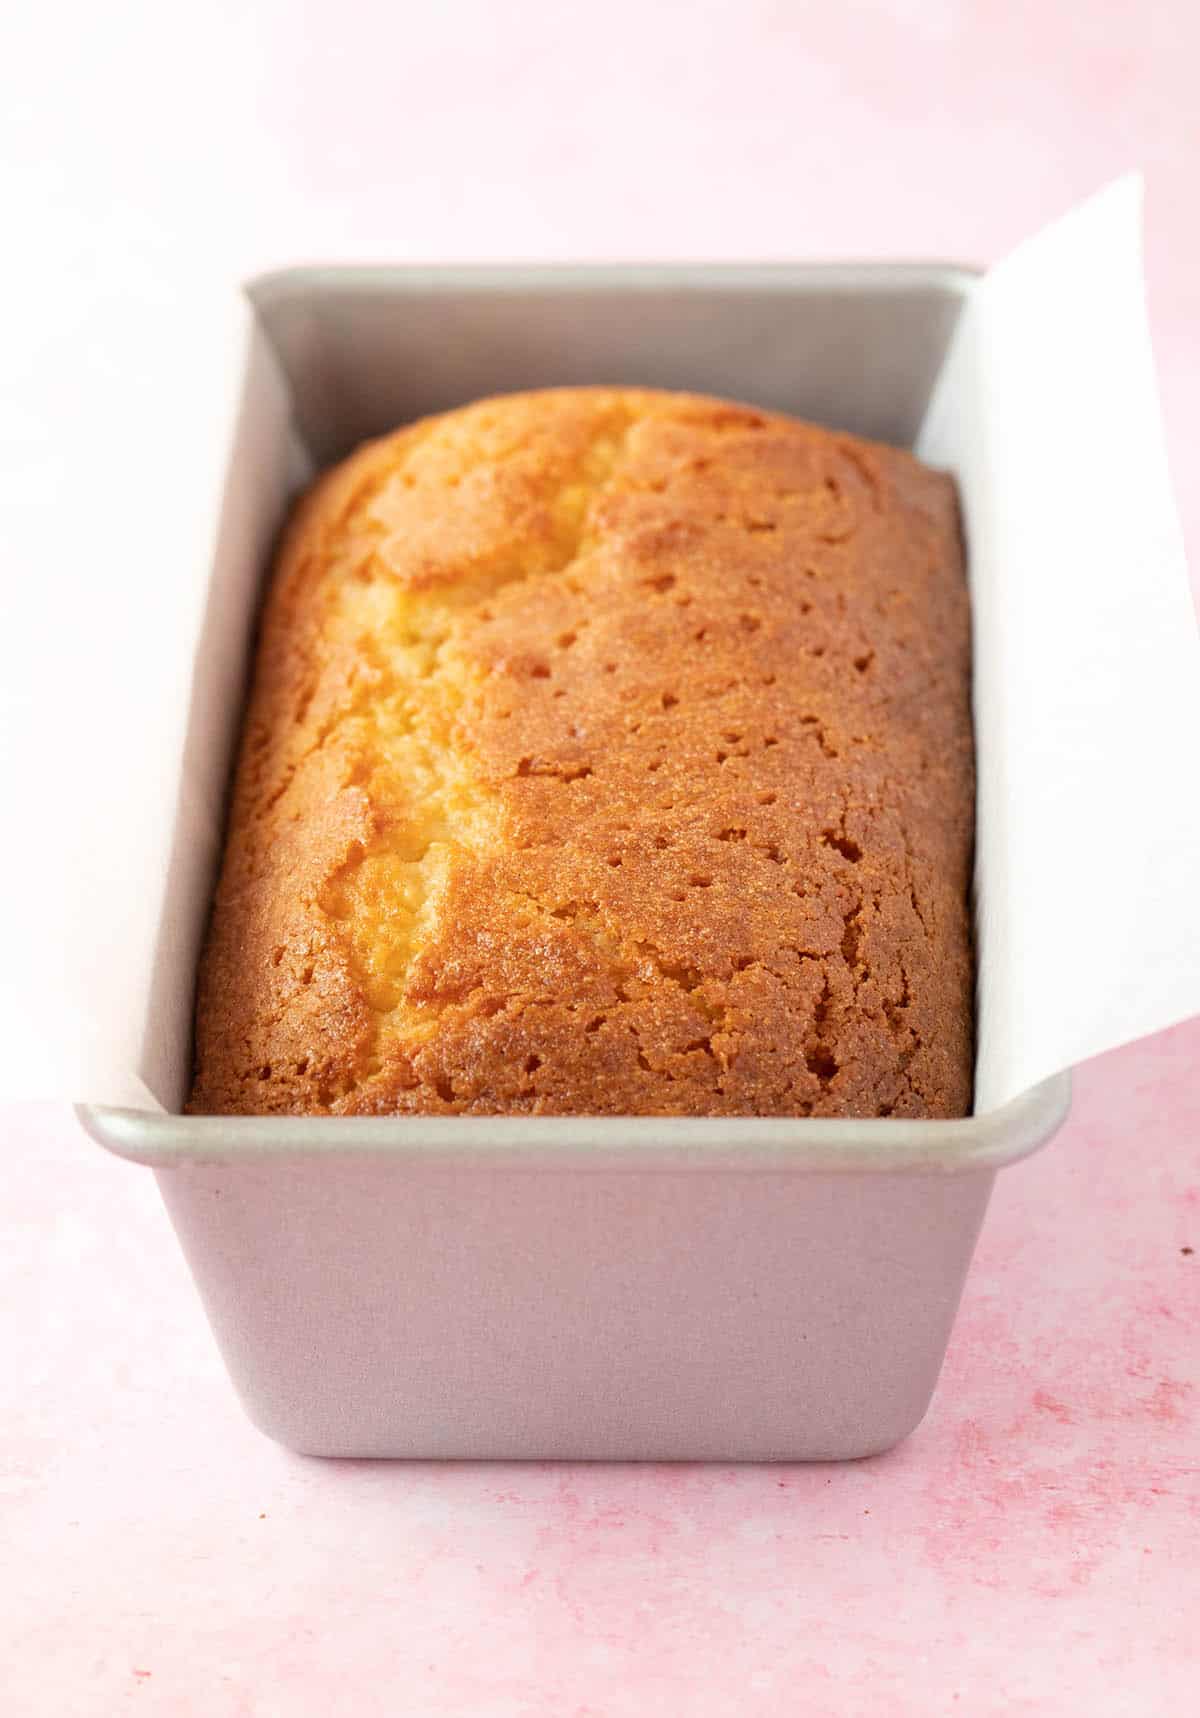 A Lemon Loaf cake sitting in a cake pan on a pink background.